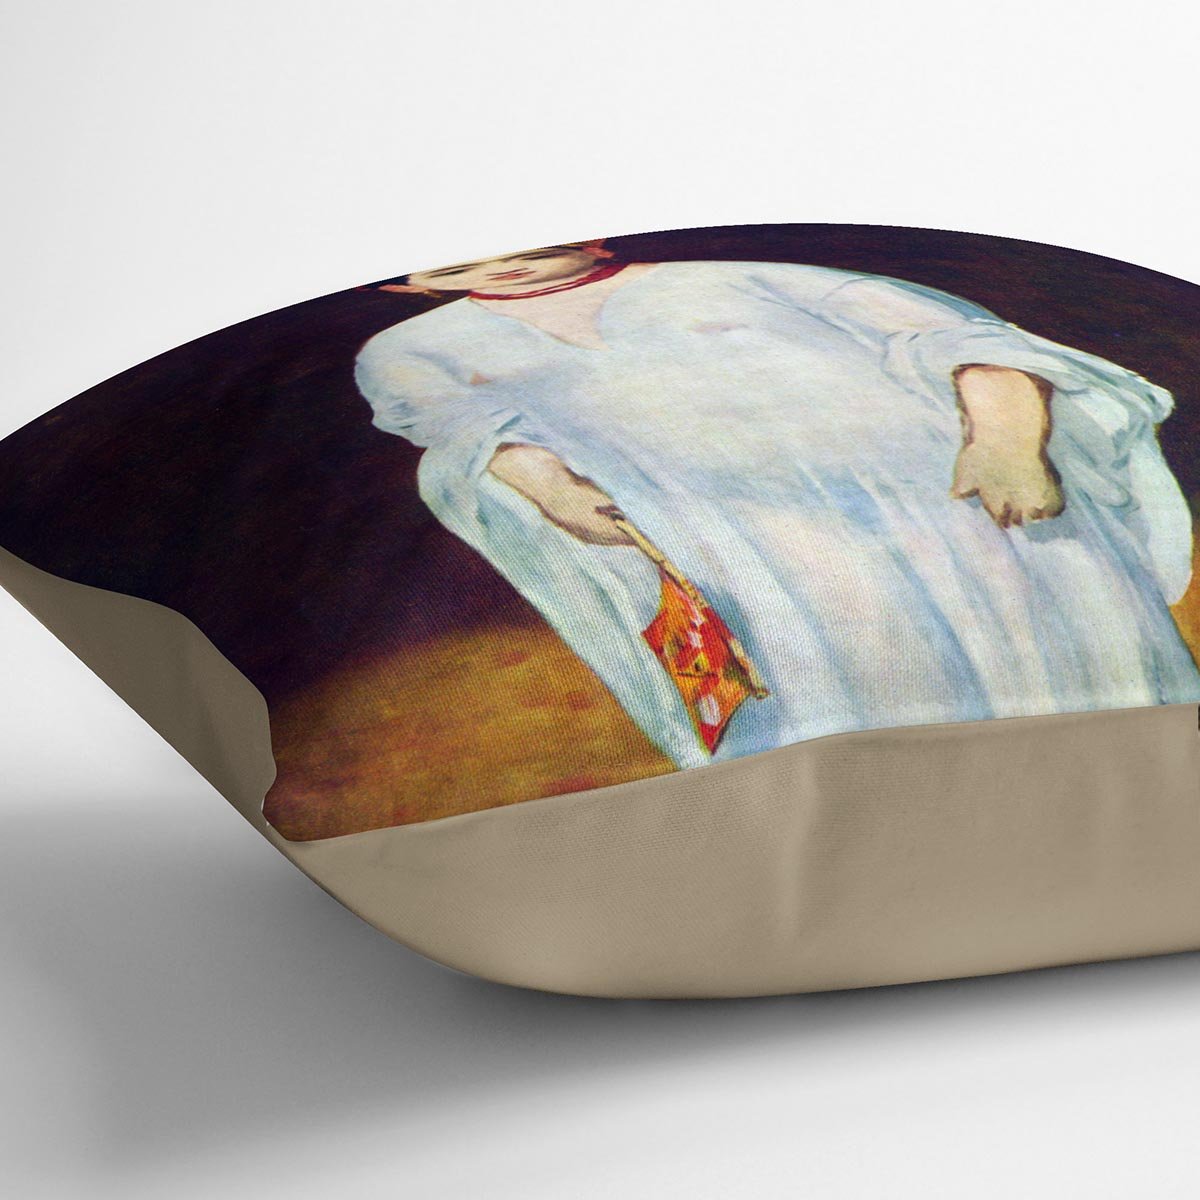 The Sultan by Manet Throw Pillow